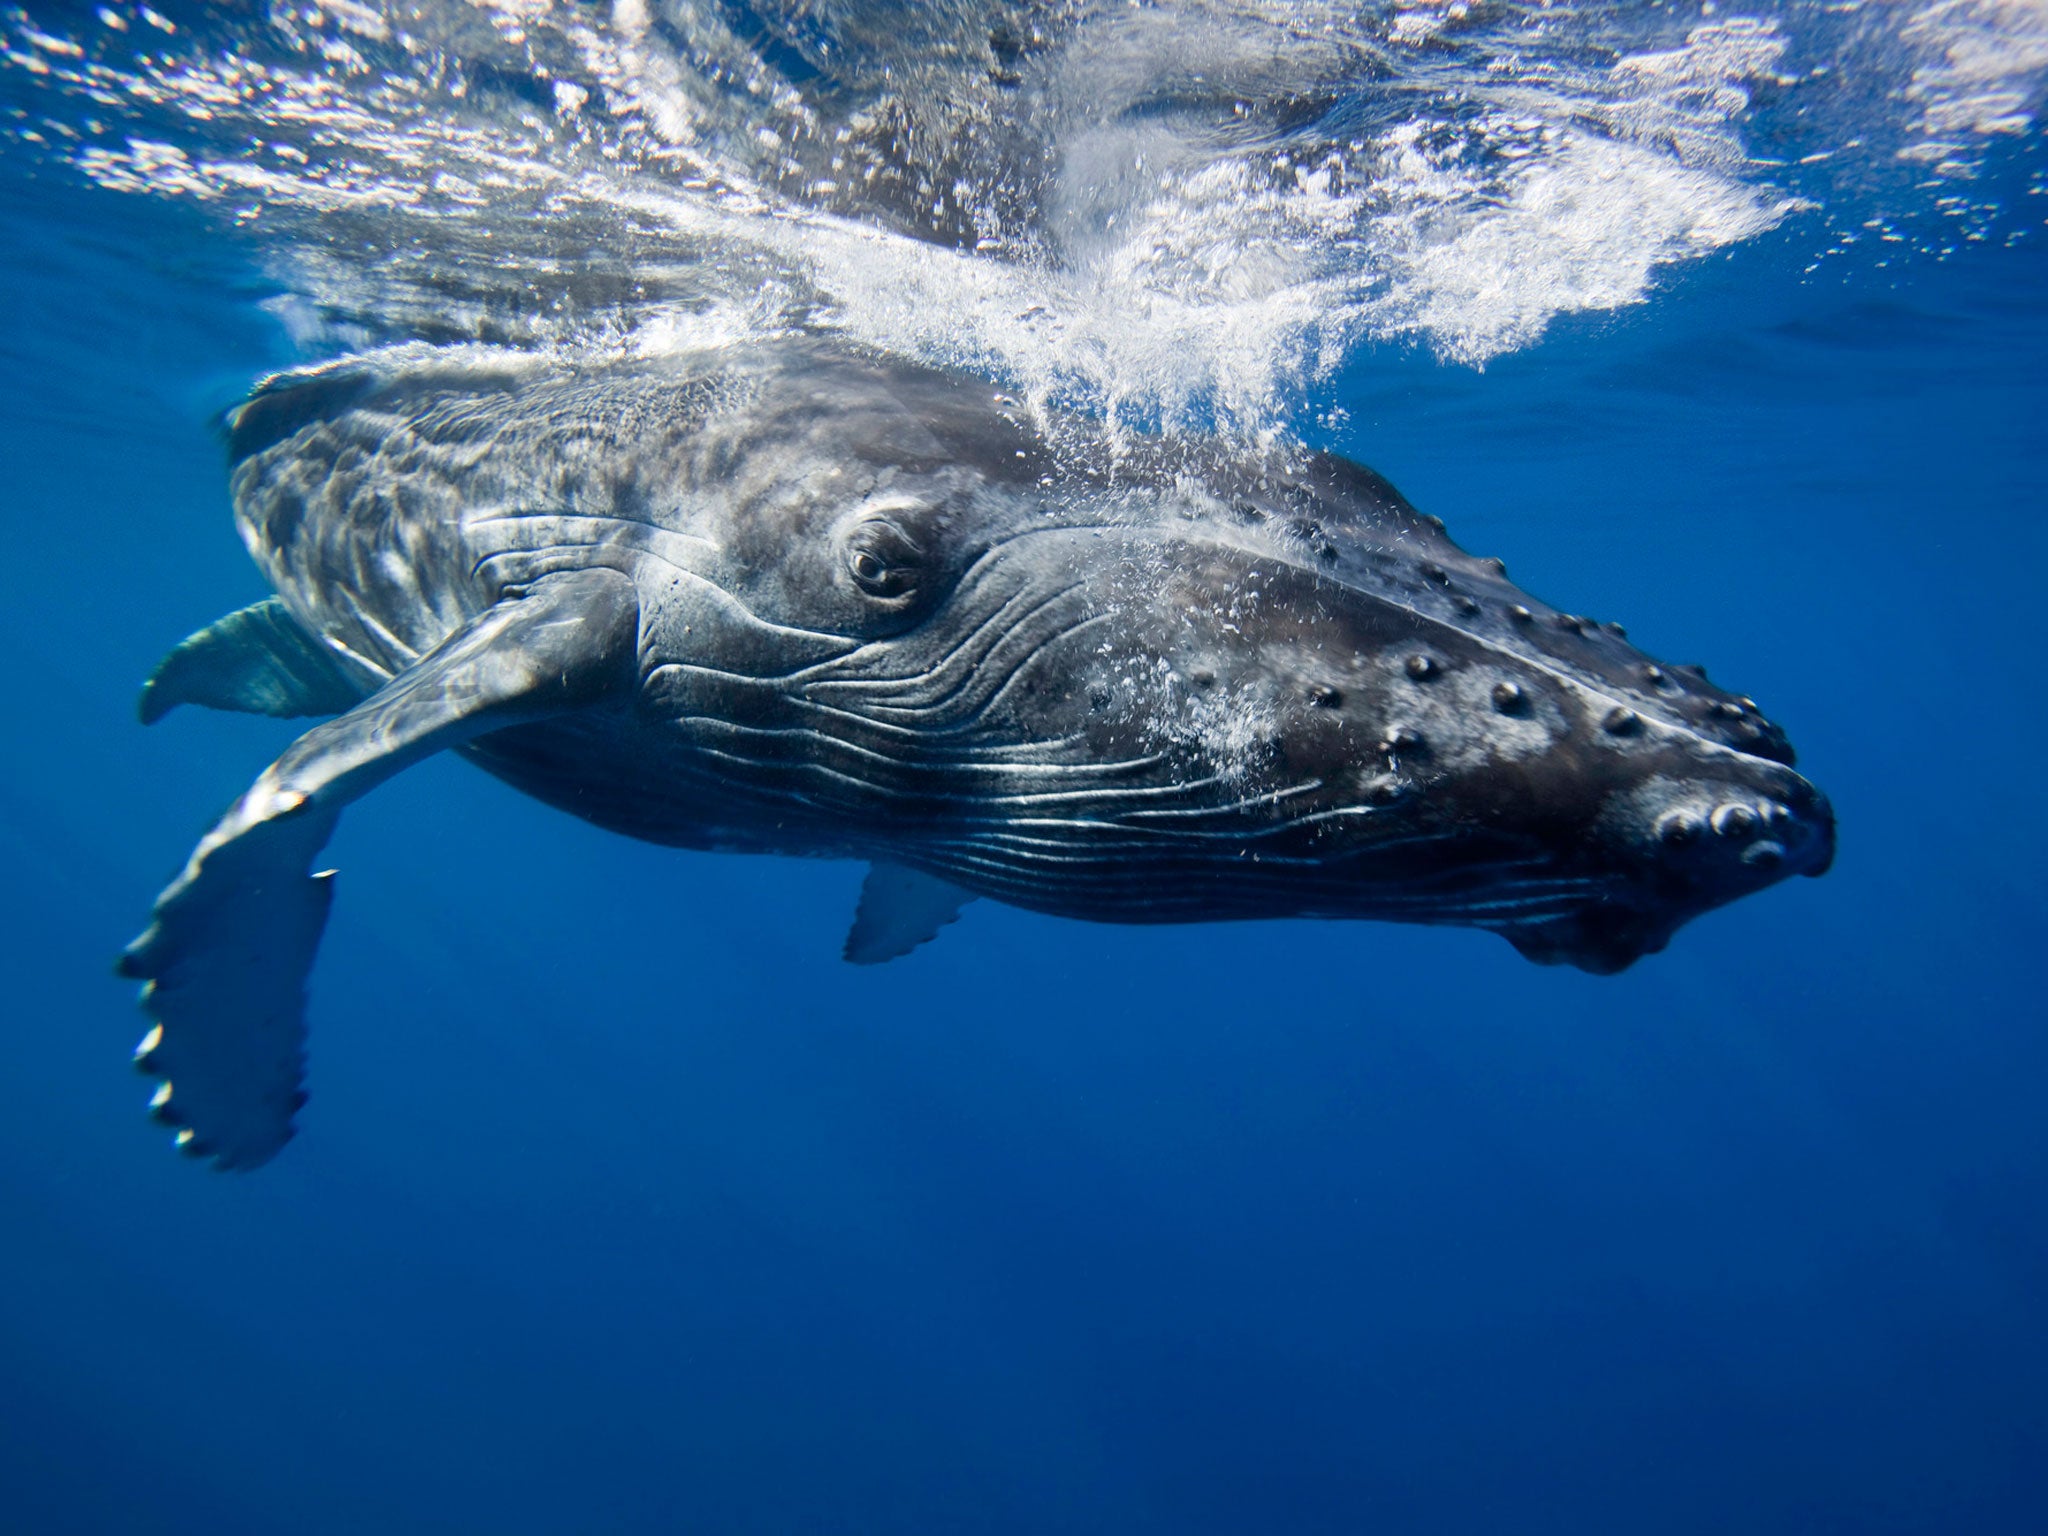 Humpback whale calves are born in the warm, safe waters off the coast of Mexico